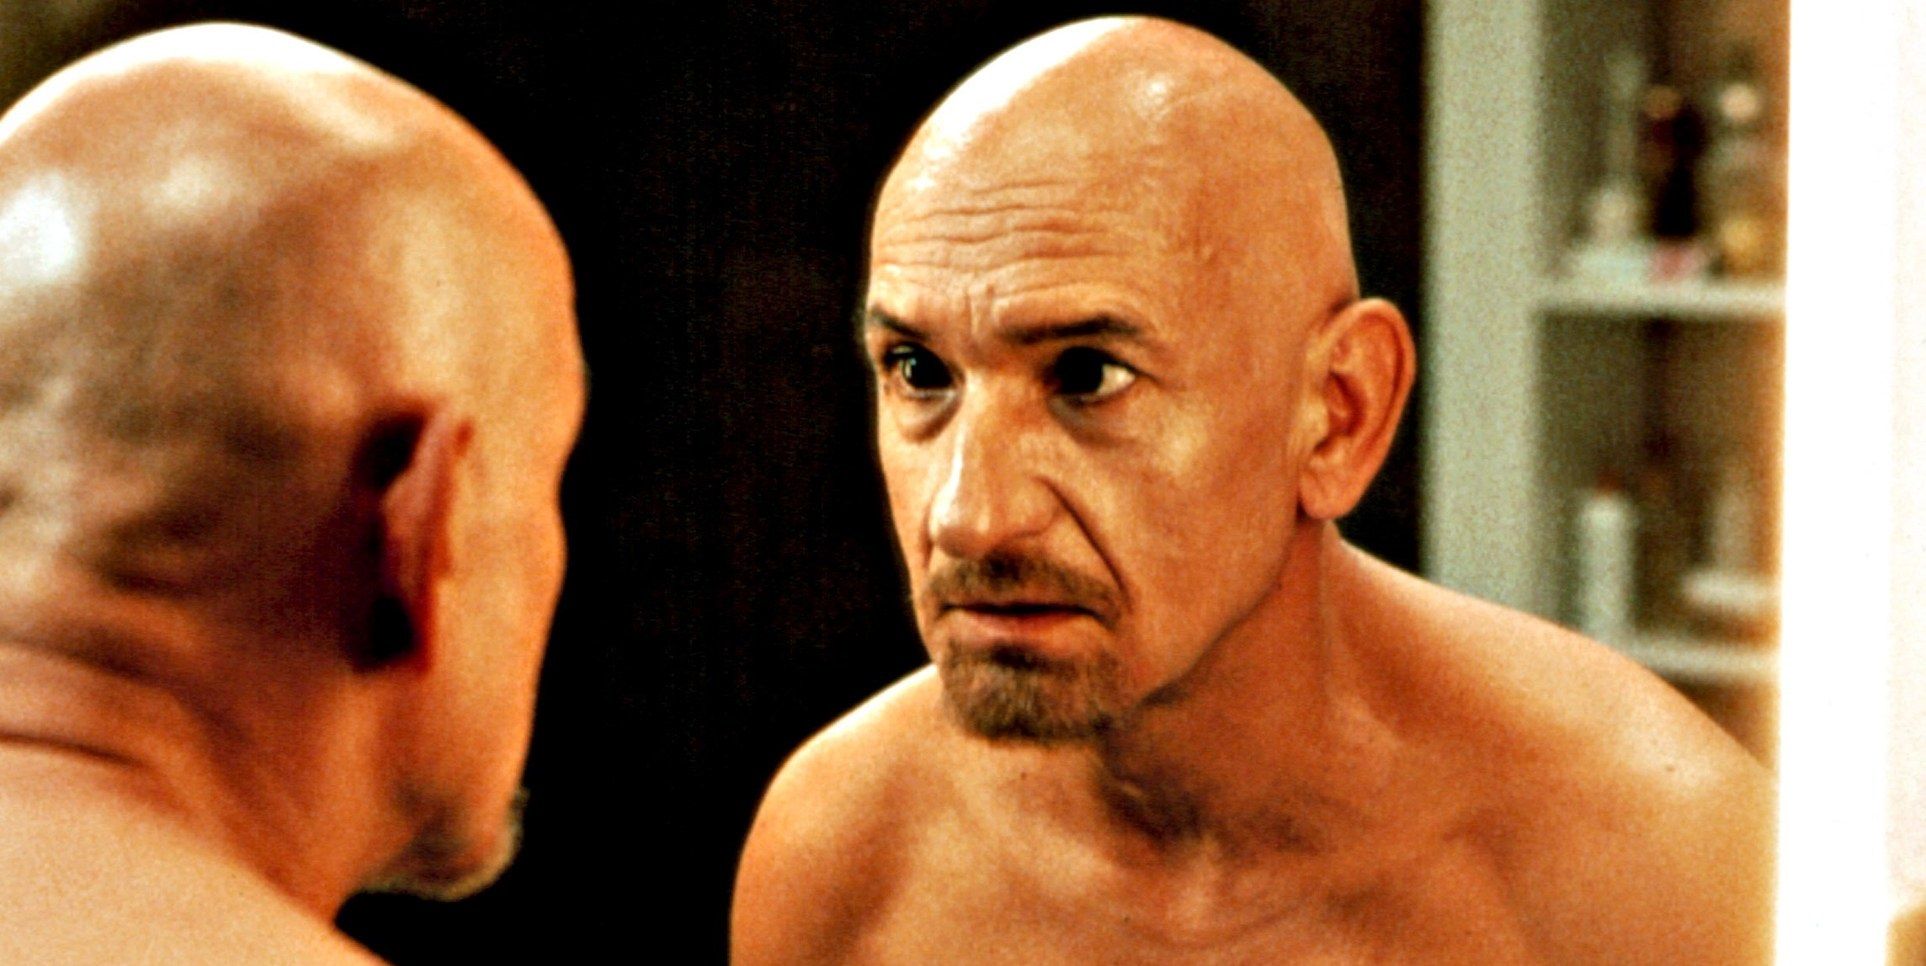 Ben Kingsley in Sexy Beast - Most Ruthless Movie Gangsters